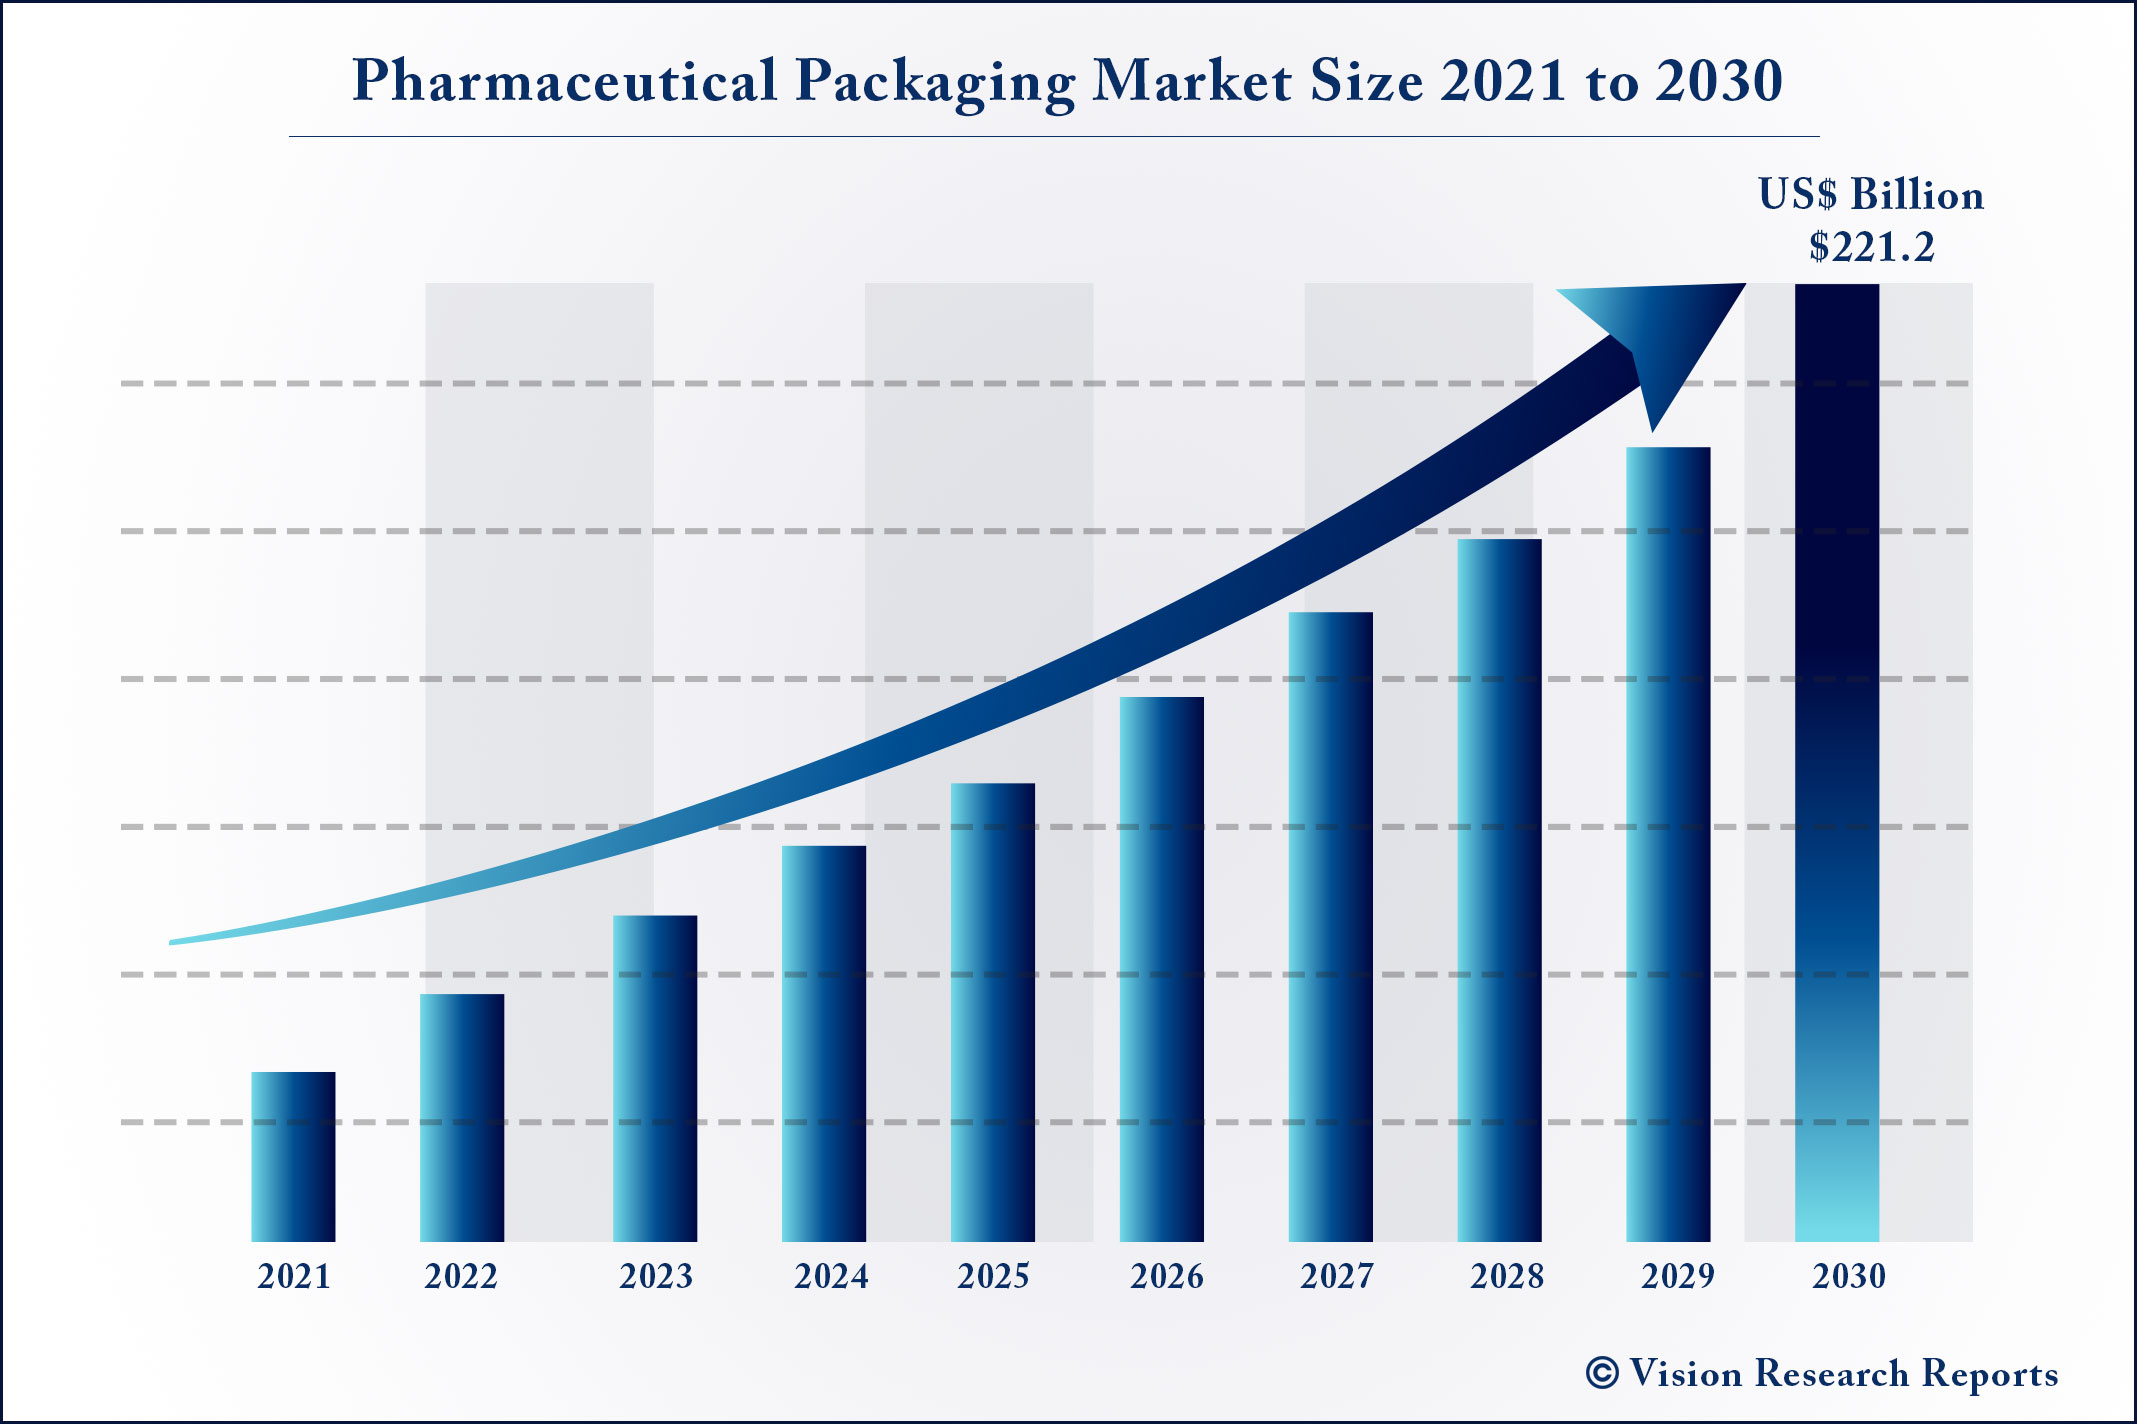 Pharmaceutical Packaging Market Size 2021 to 2030